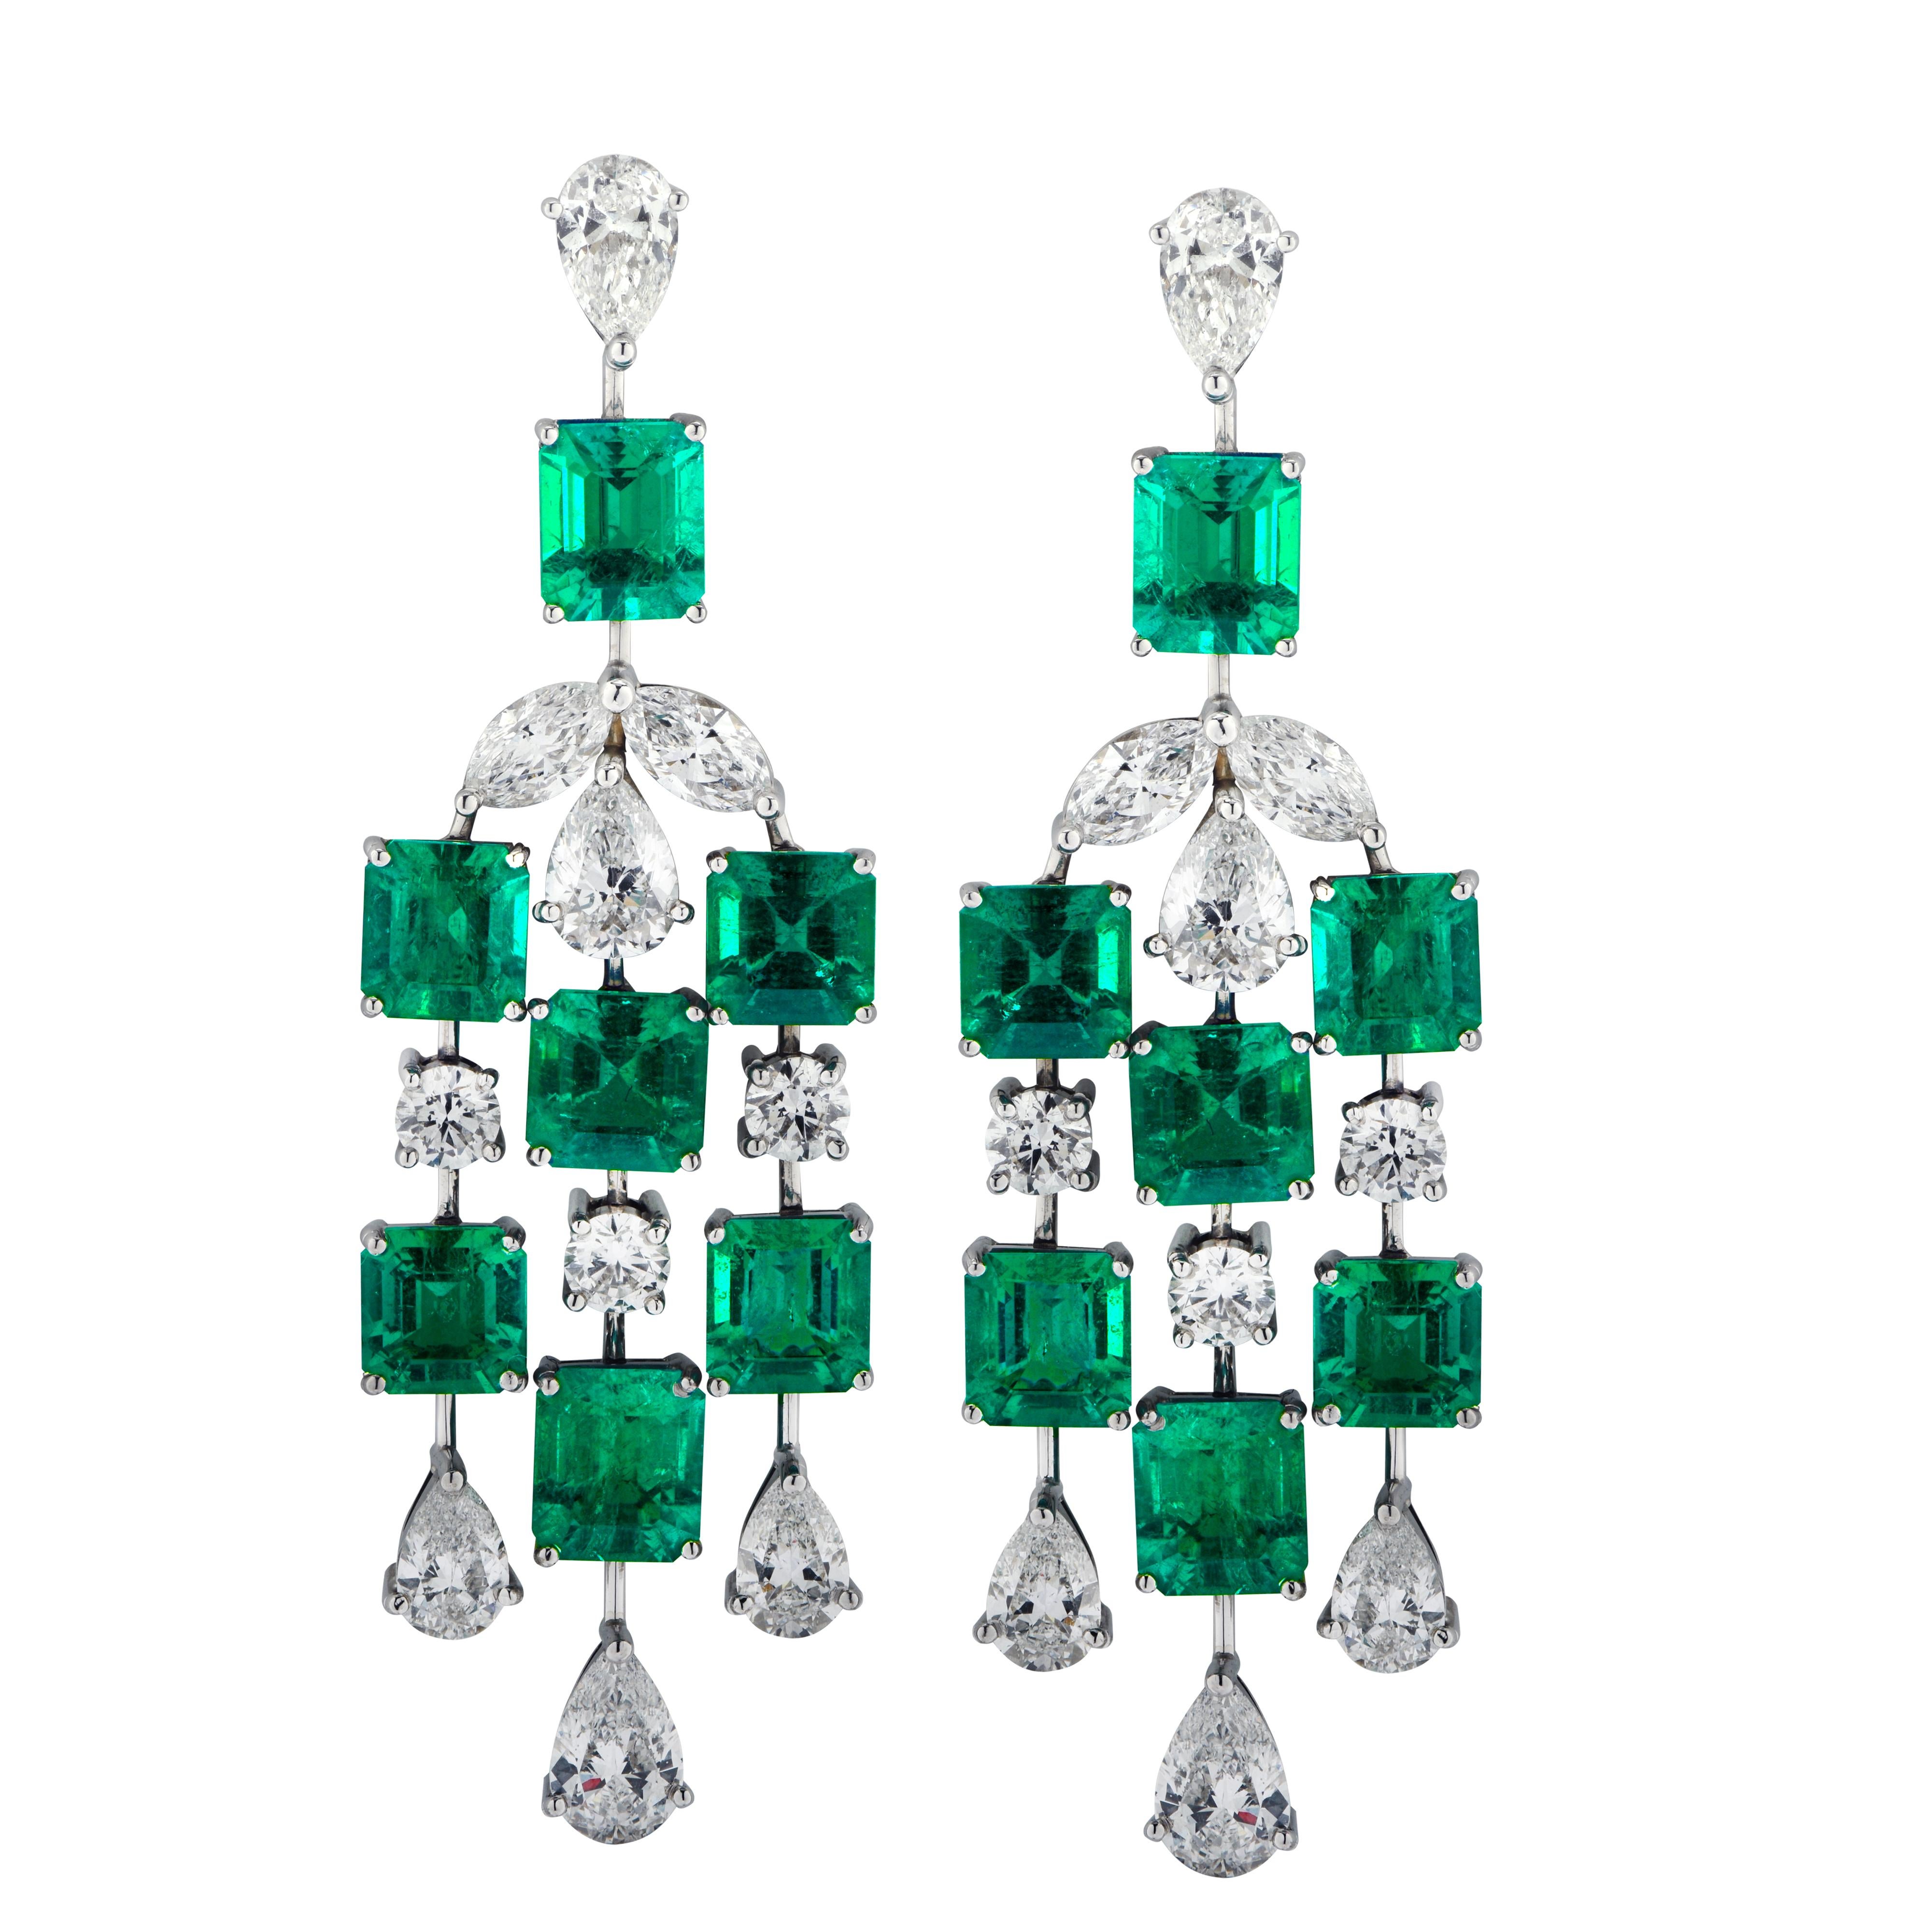 Sensational Vivid Diamonds dangle earrings crafted in platinum, showcasing 14 exquisite Emerald Cut, Vivid Green Colombian Emeralds weighing 11.11 carats total, accented by 20 Pear, Marquise and Round Brilliant cut diamonds weighing 6.15 carats